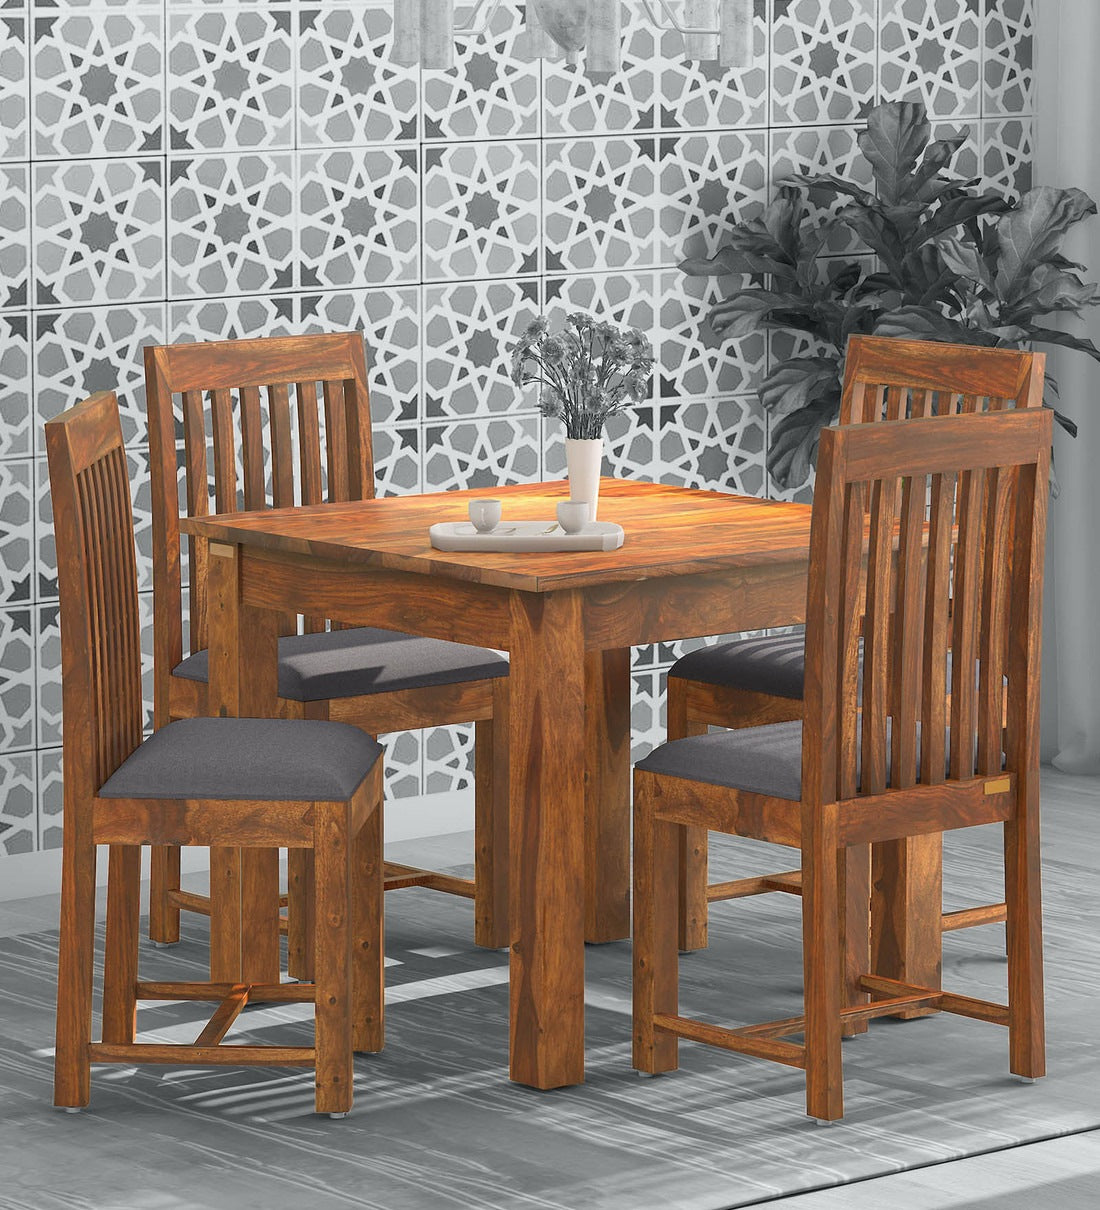 Peter Solid Wood 4 Seater Dining Set For Dining Room in Provincial Teak Finish - Rajwada Furnish